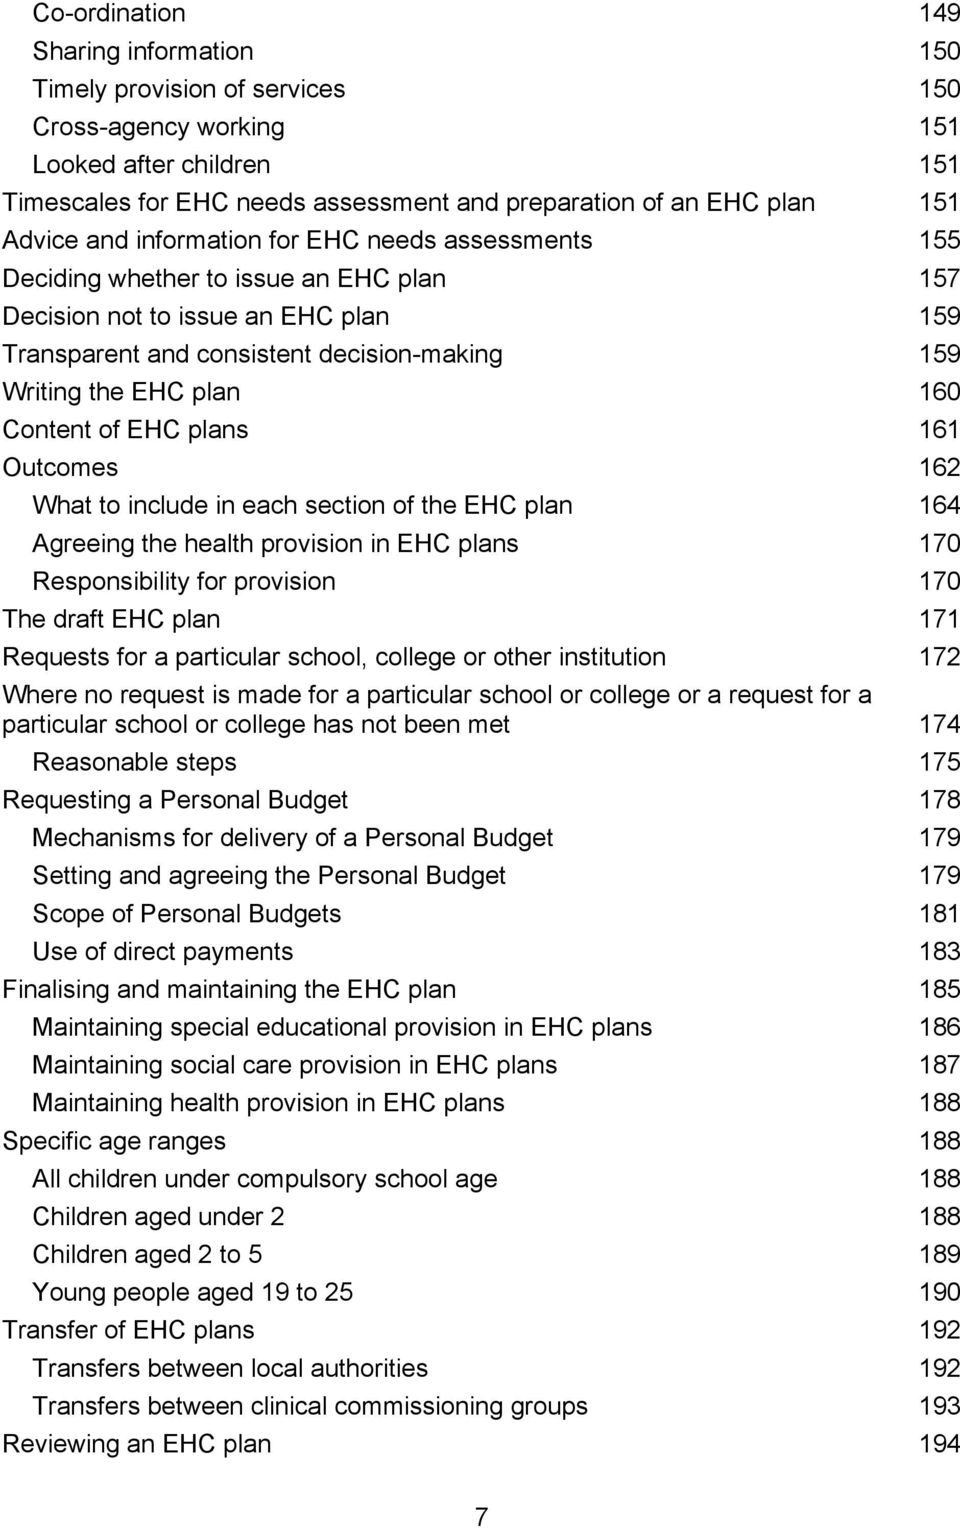 plan 160 Content of EHC plans 161 Outcomes 162 What to include in each section of the EHC plan 164 Agreeing the health provision in EHC plans 170 Responsibility for provision 170 The draft EHC plan